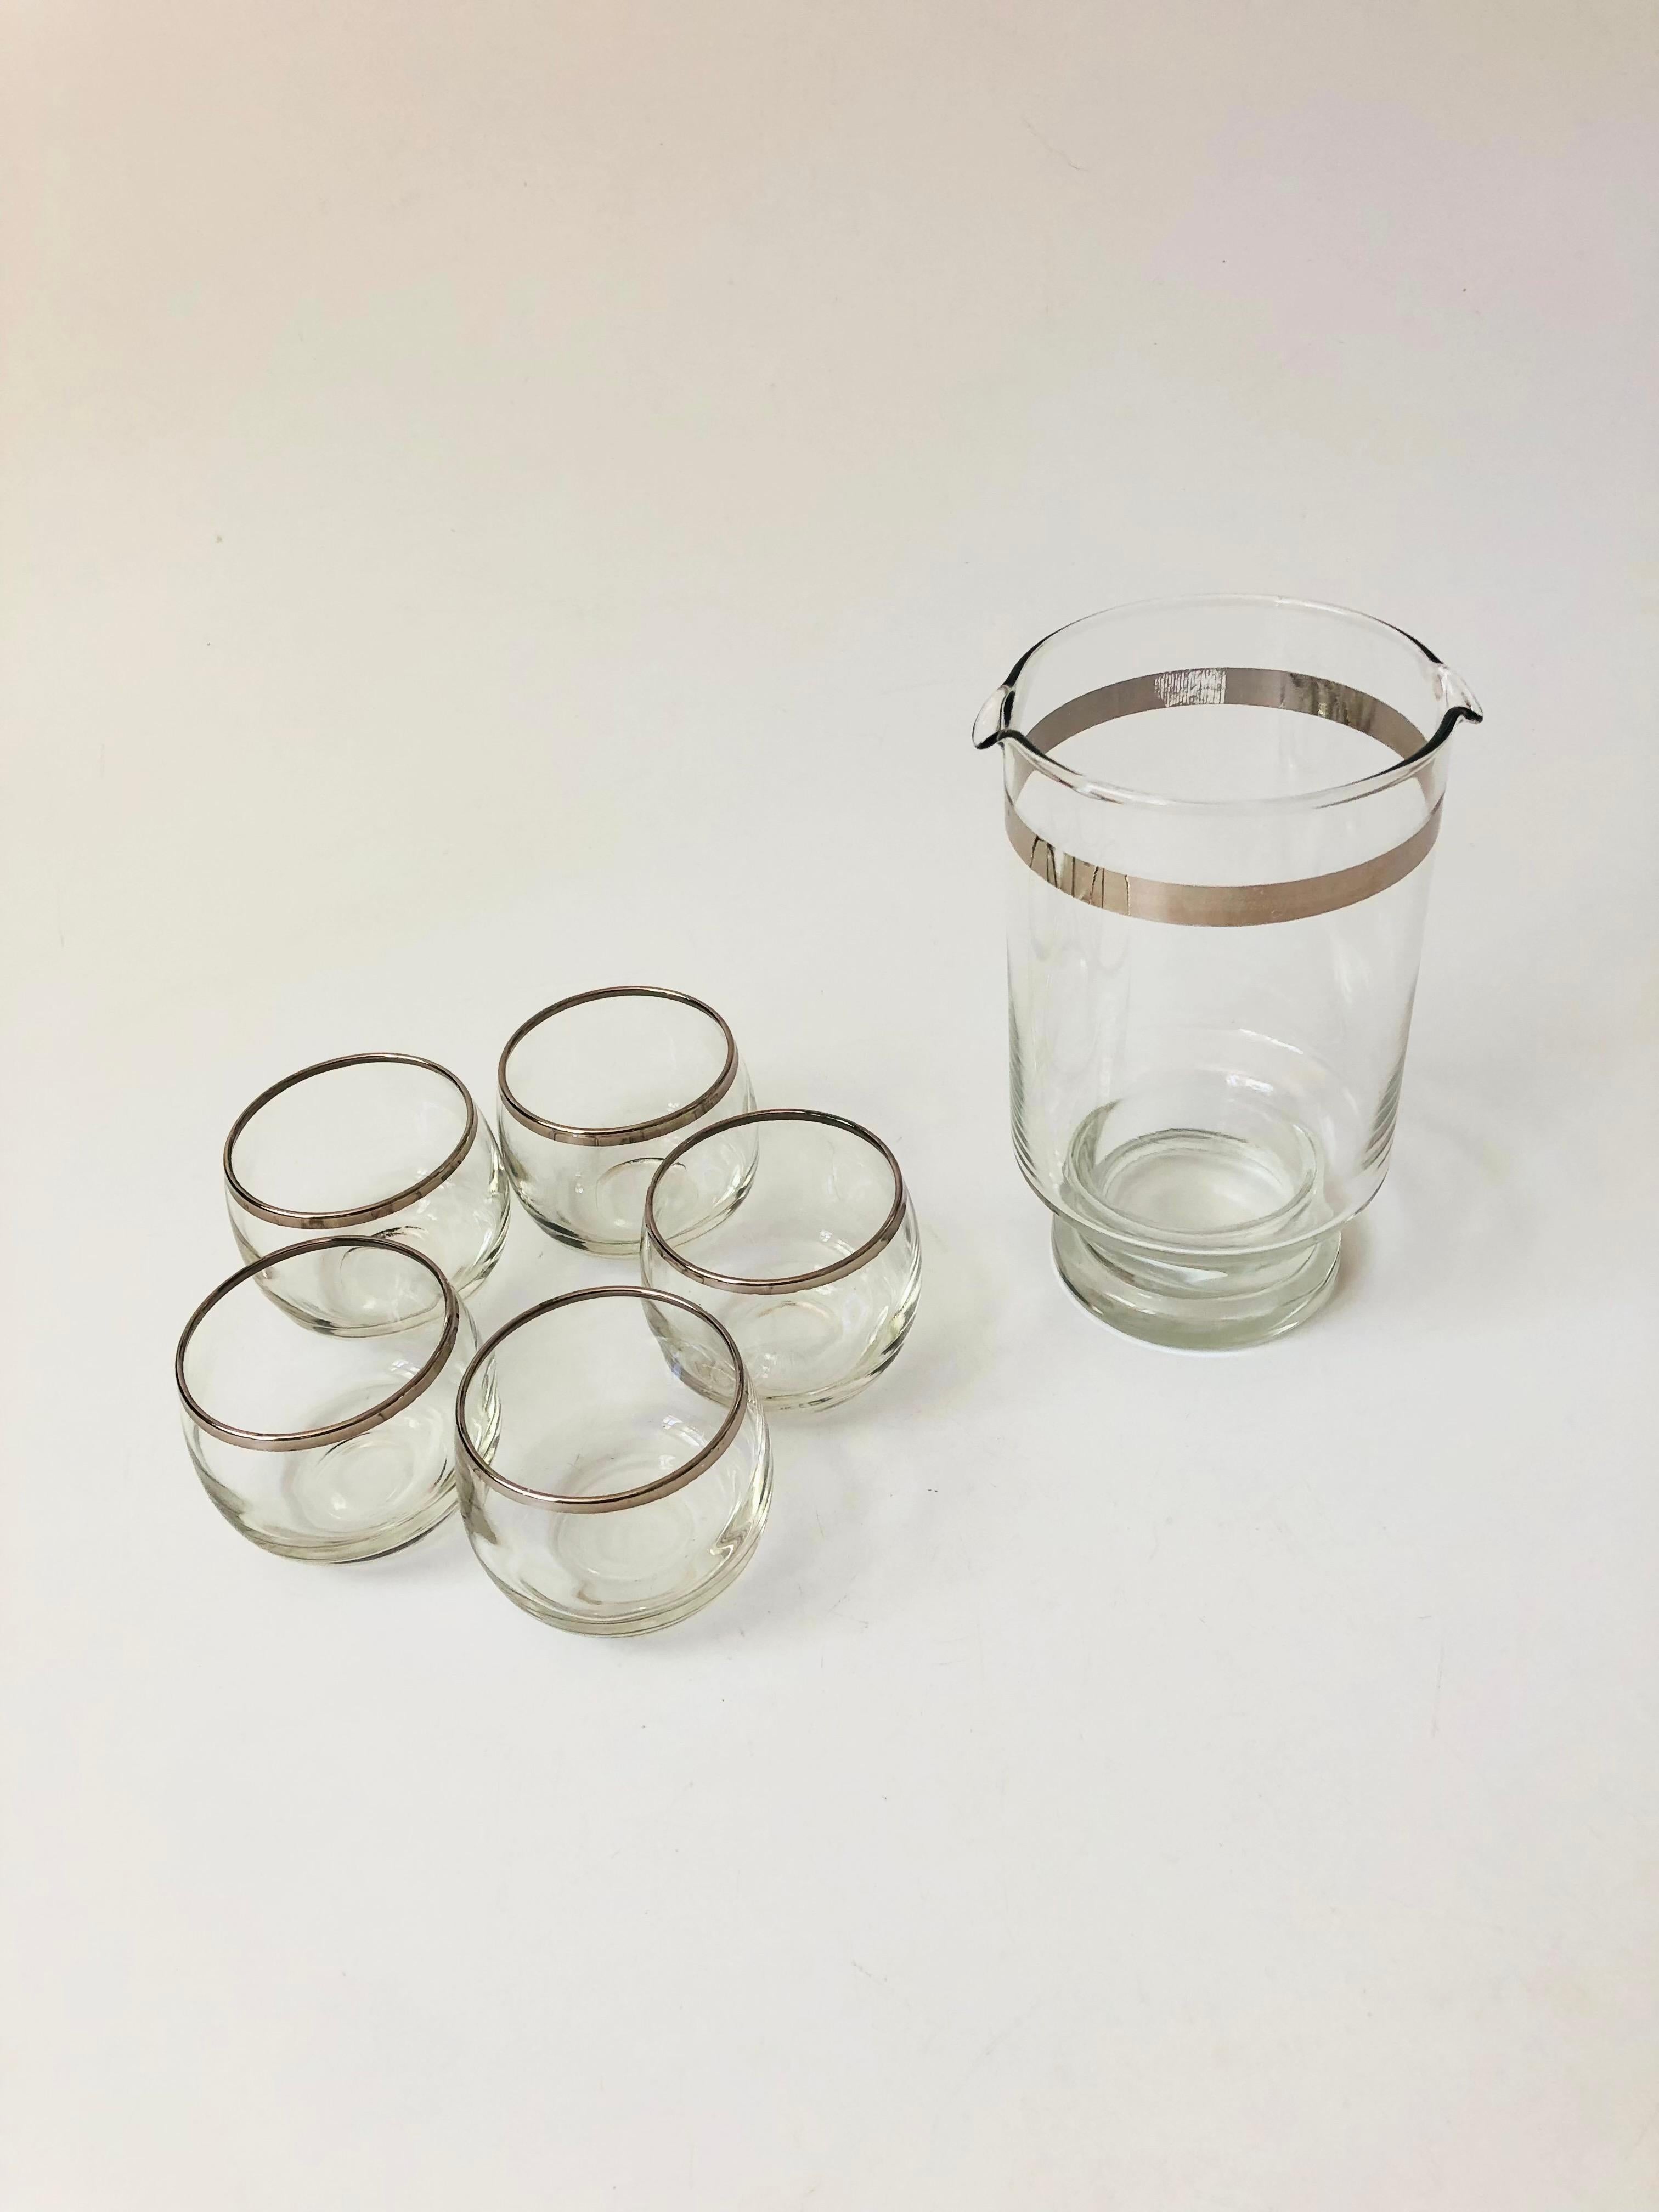 A mid century silver rimmed cocktail set. Includes a double spouted pitcher and 5 roly poly cordials. Metallic silver trim decorates each piece.
Measurements:
Pitcher: 4.25